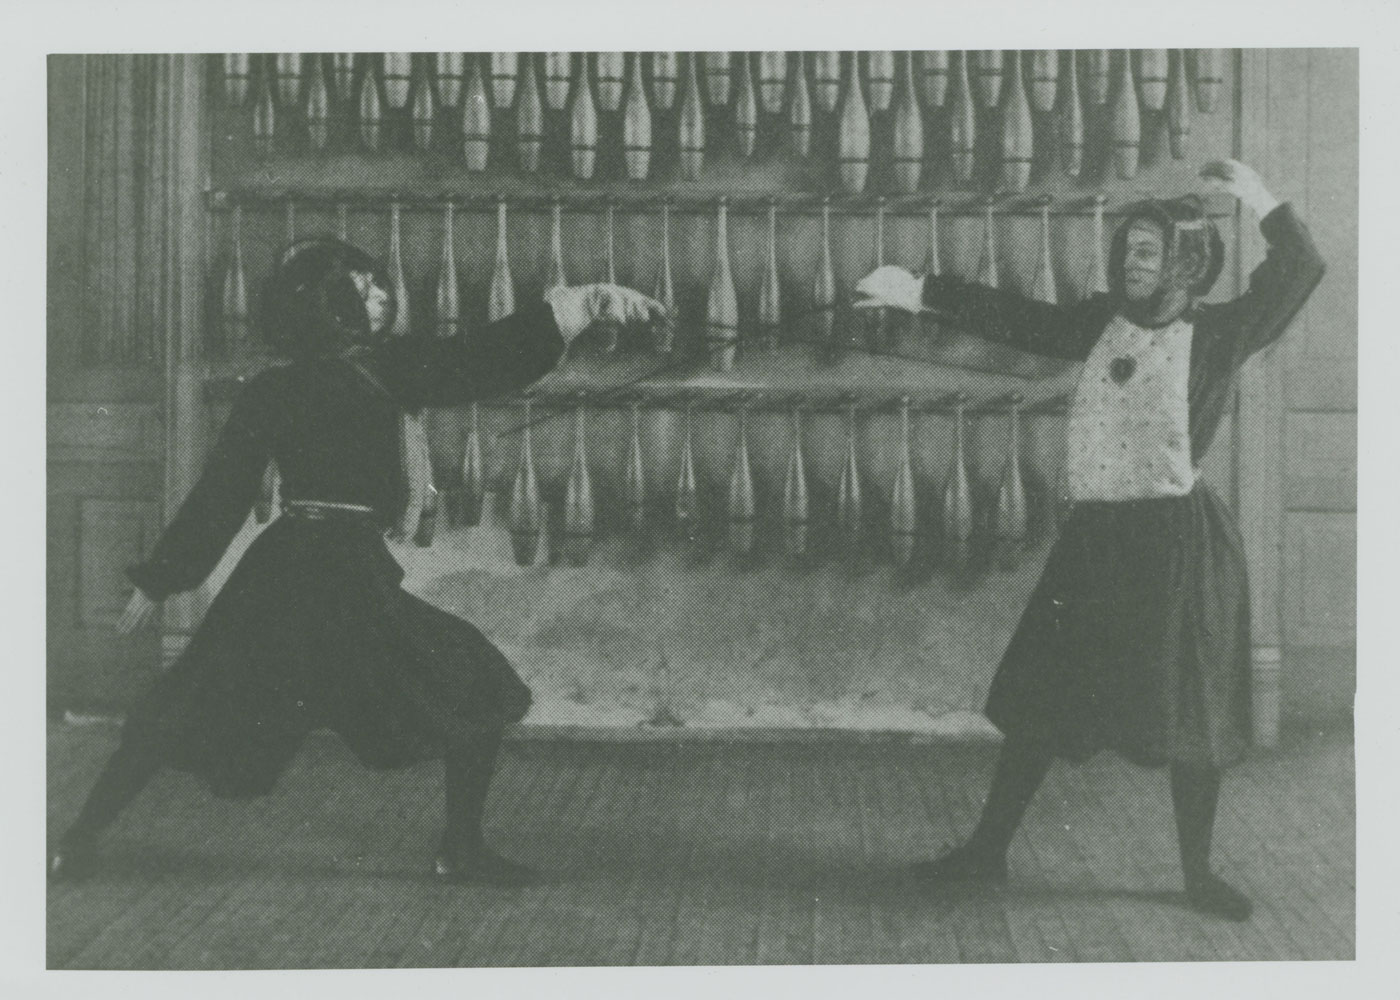 A black and white image of two women fencing